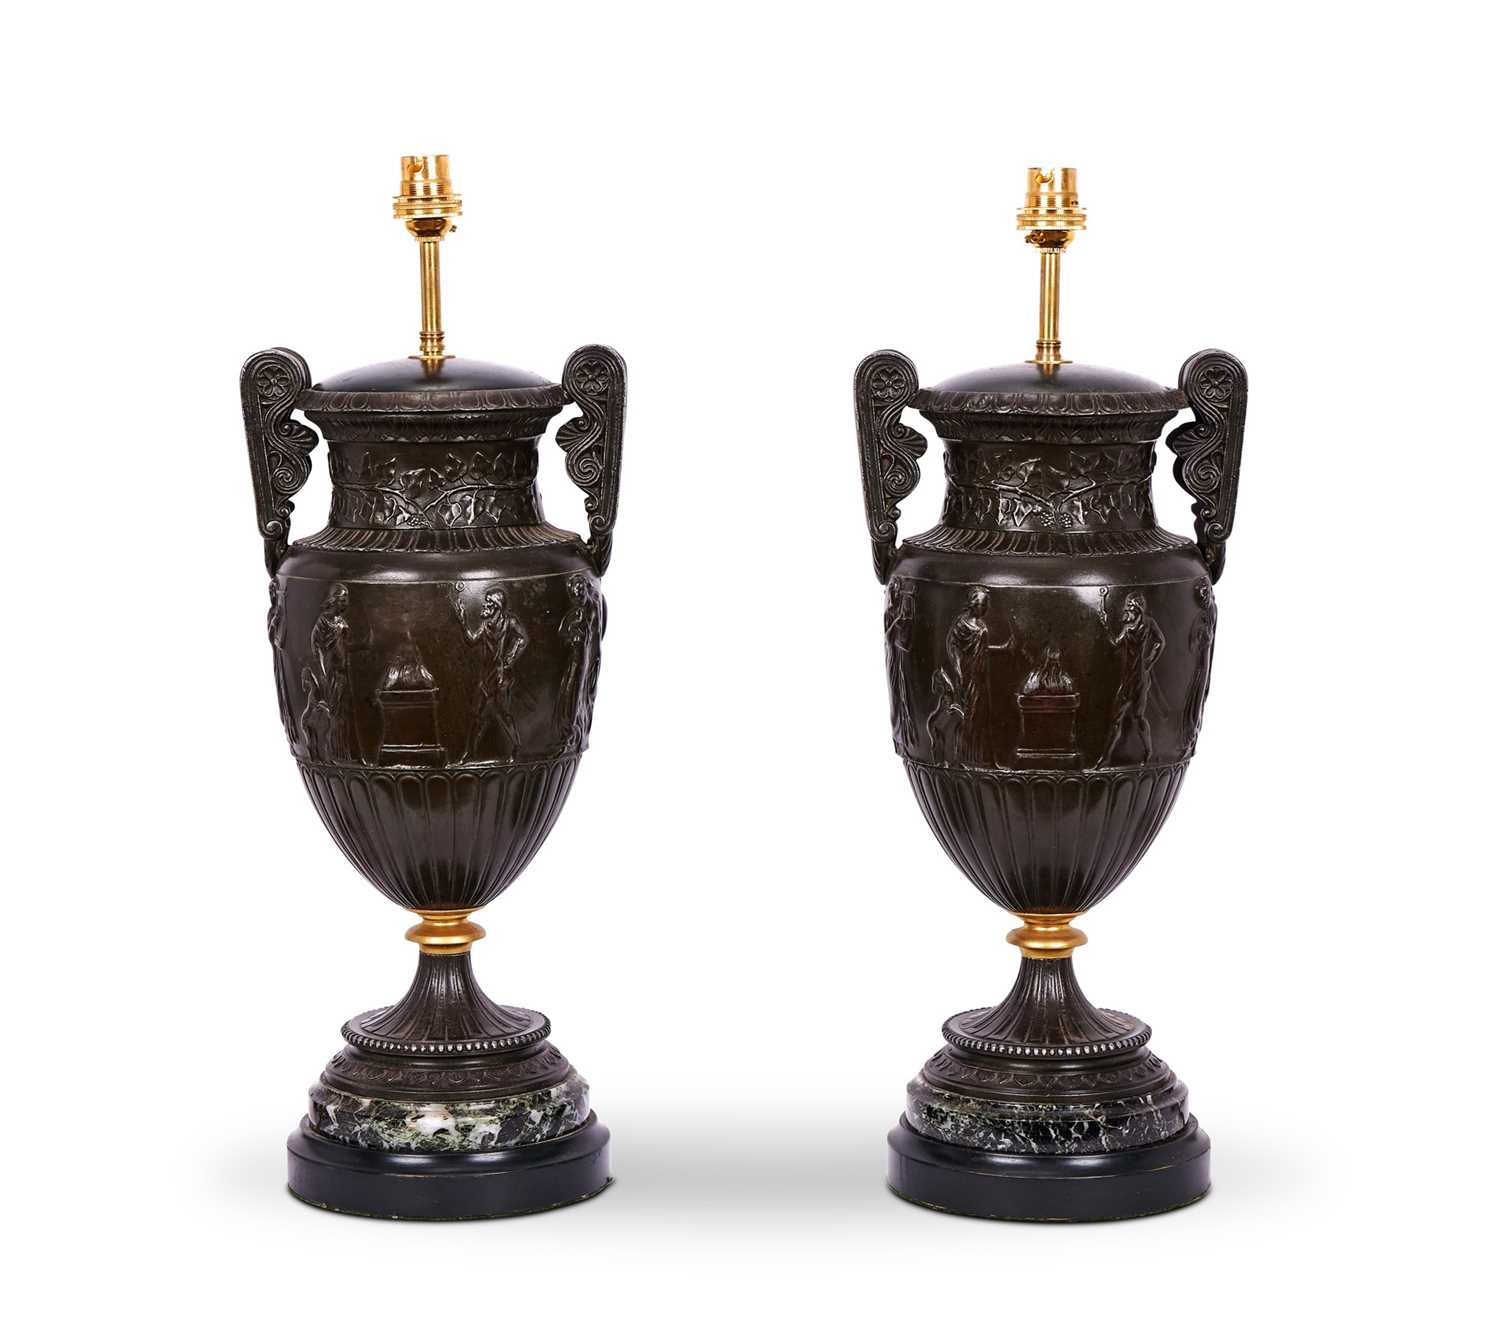 A PAIR OF 19TH CENTURY CLASSICAL STYLE LAMP BASES